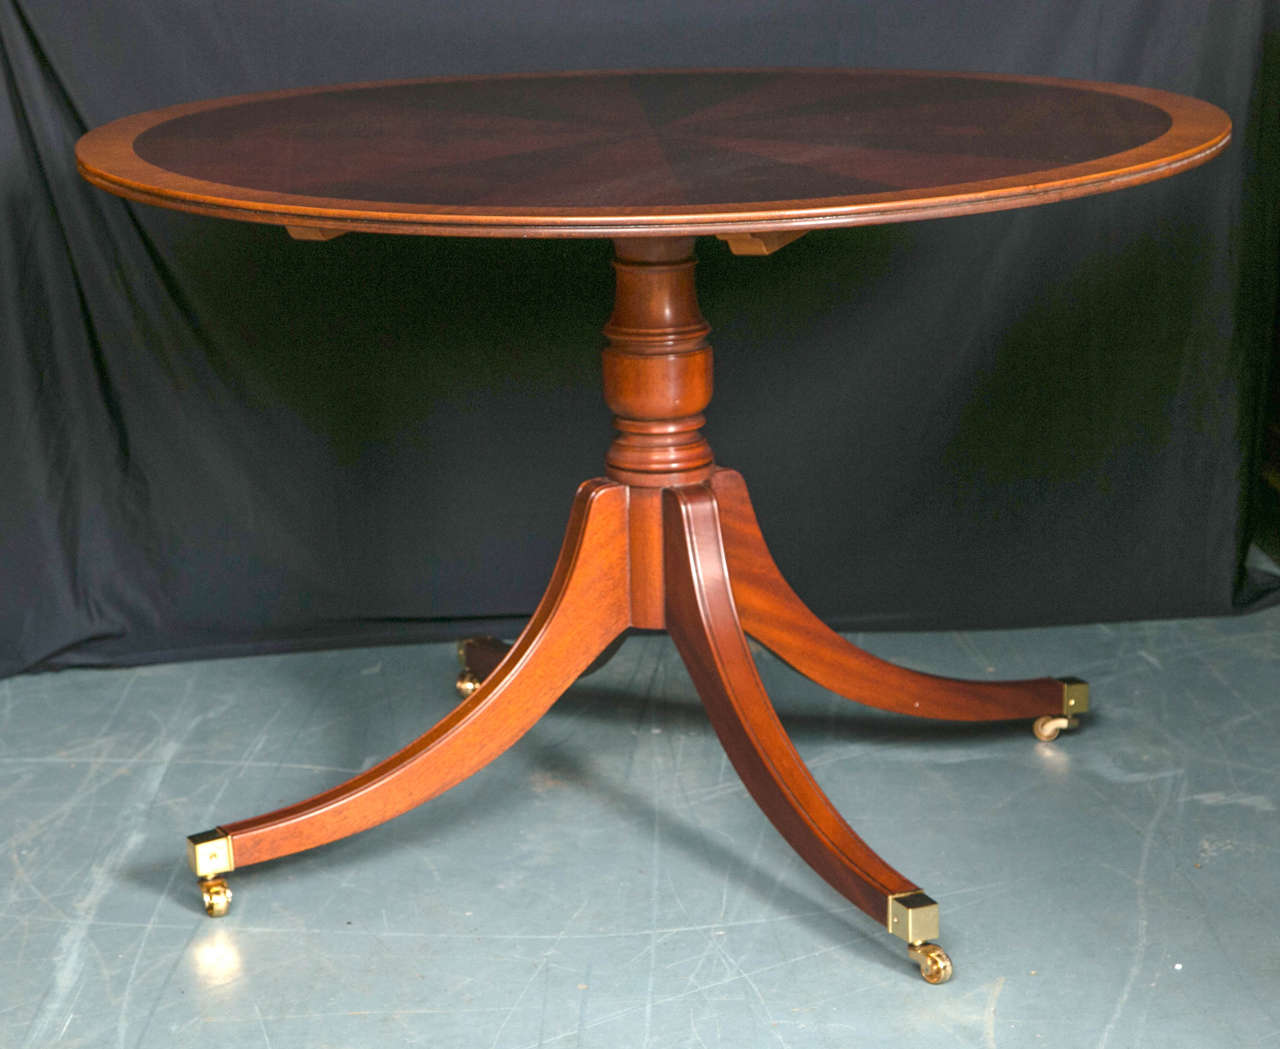 Created in the style of tables from the 18th century, this circular, mahogany starburst table is supported by a single column pedestal with four splay legs ending in brass toe caps and casters. Banded in satinwood and having a reeded edge, this